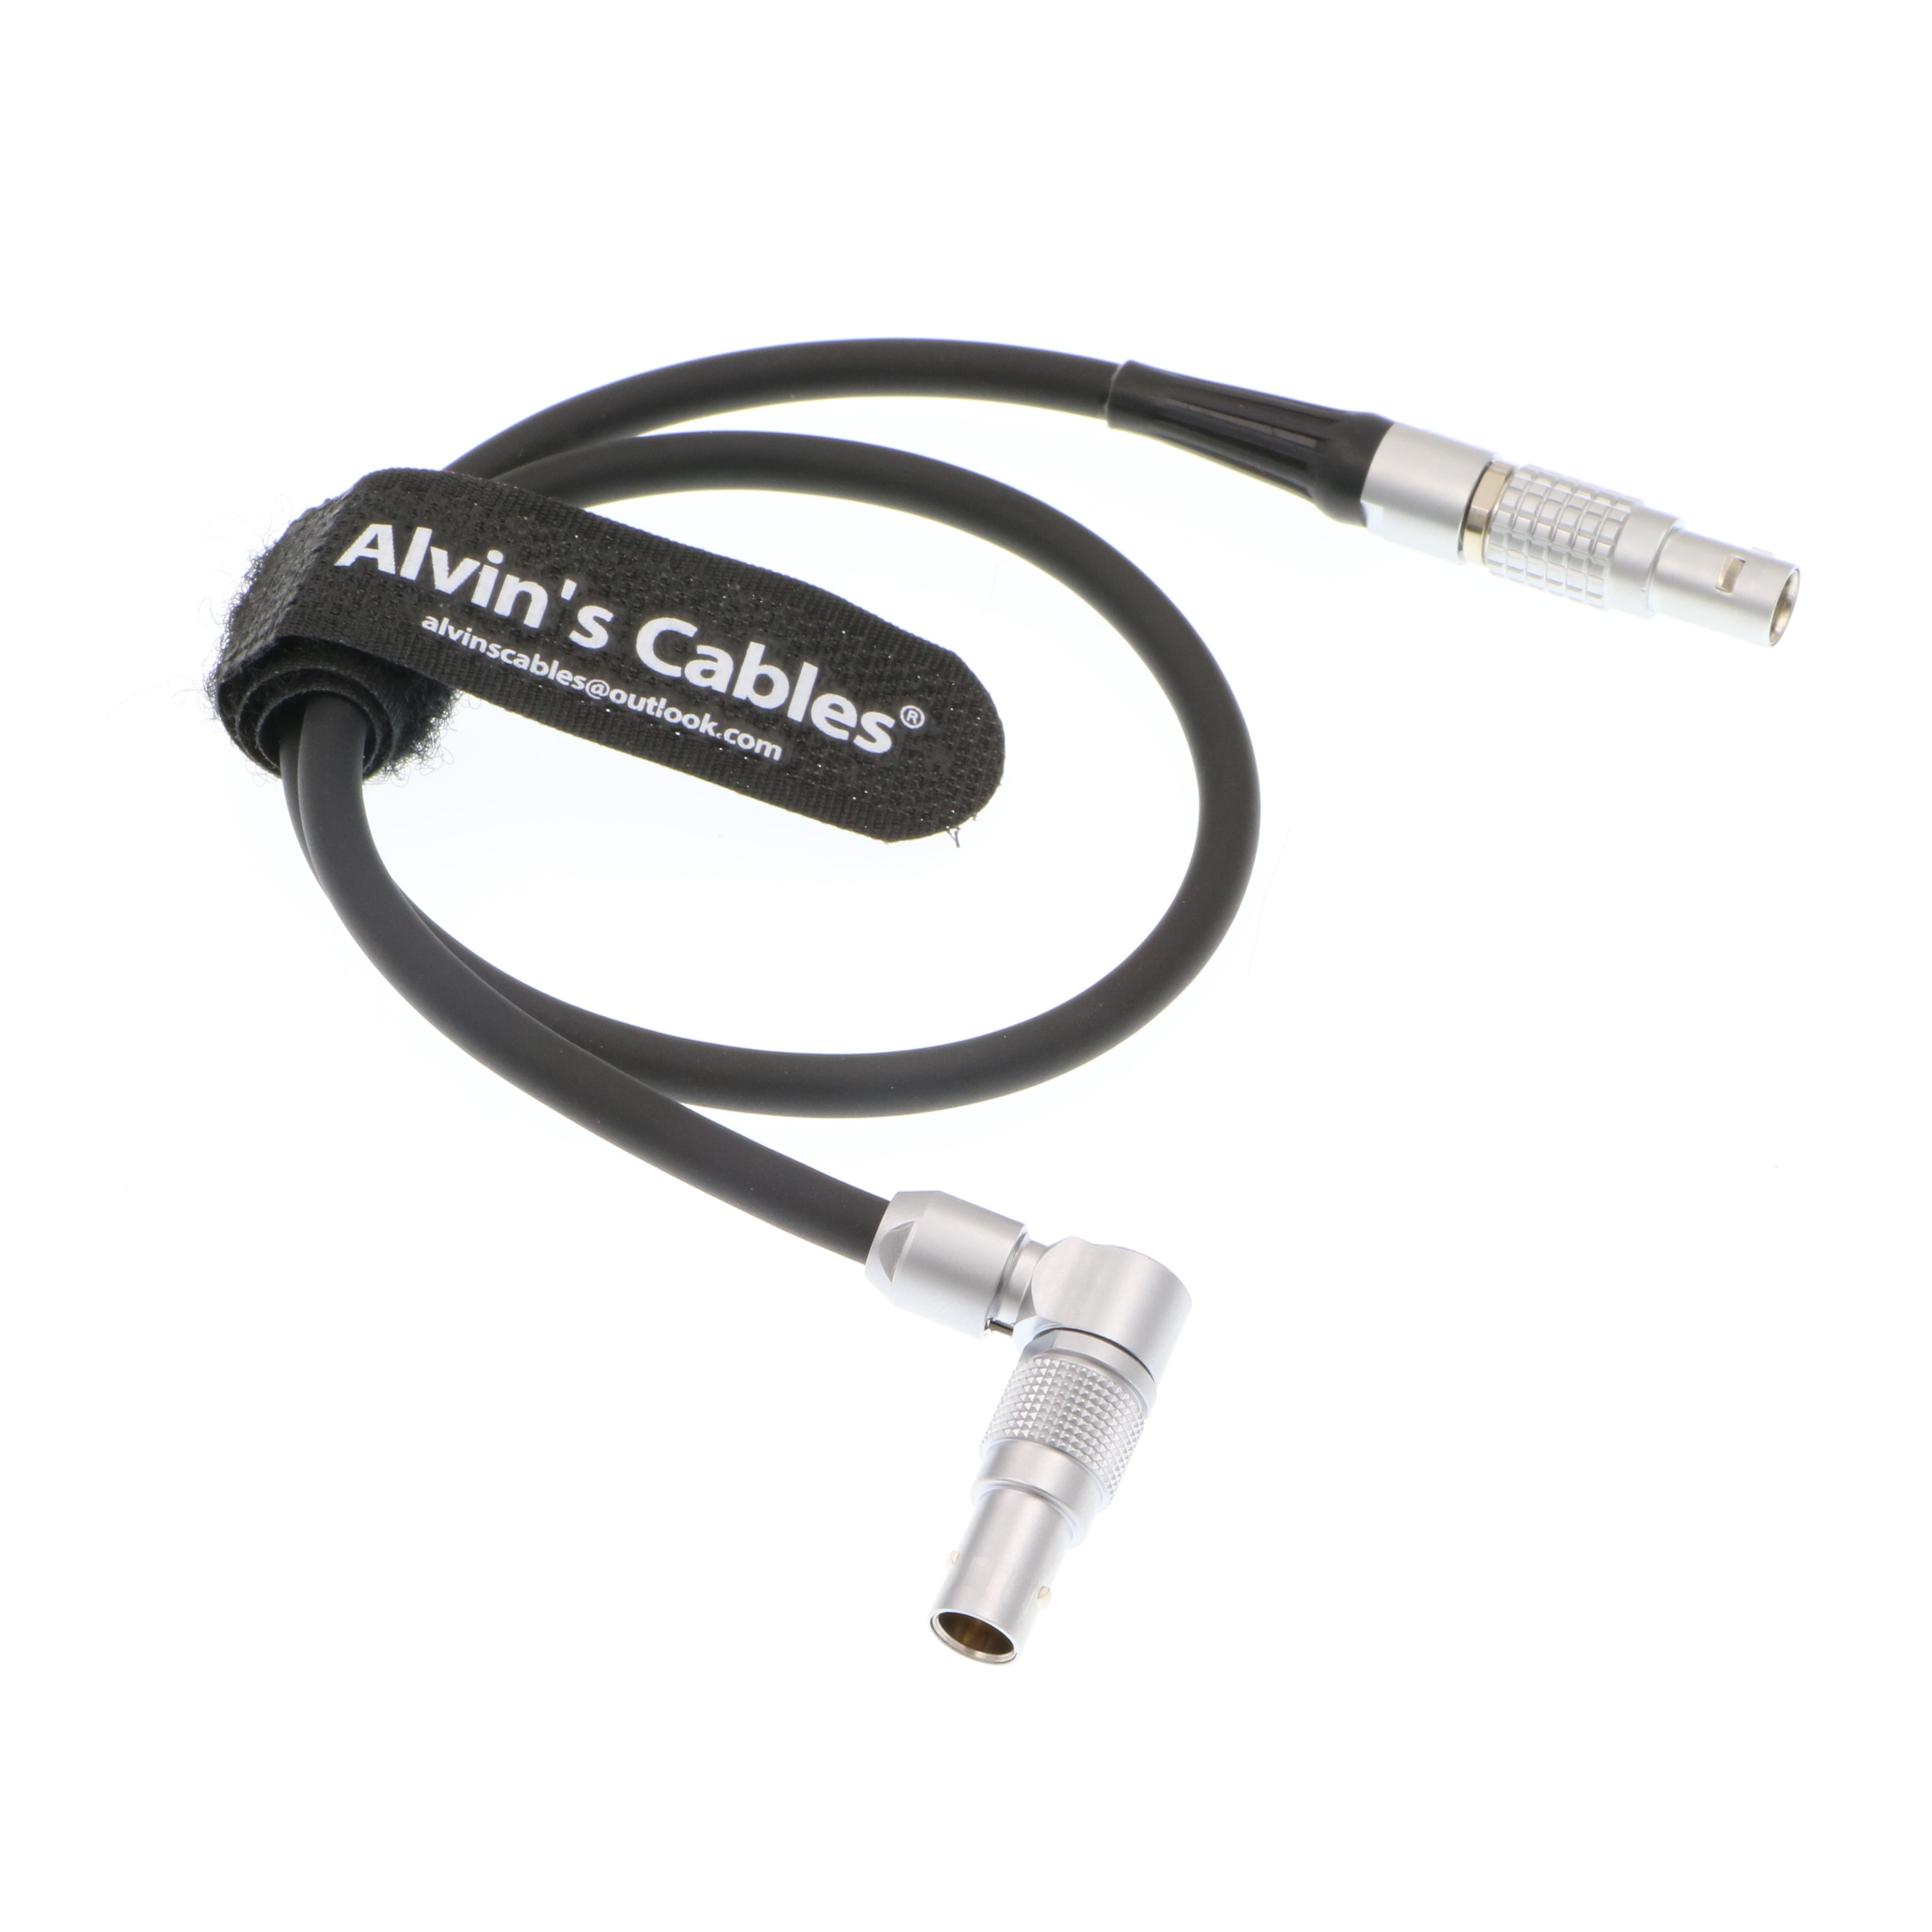 Alvin’s Cables Power Cable for Nucleus M from Z CAM E2 Flagship S6 F6 F8 Camera Rotatable 2 Pin Male Right Angle to Nucleus M 7 Pin Power Cord